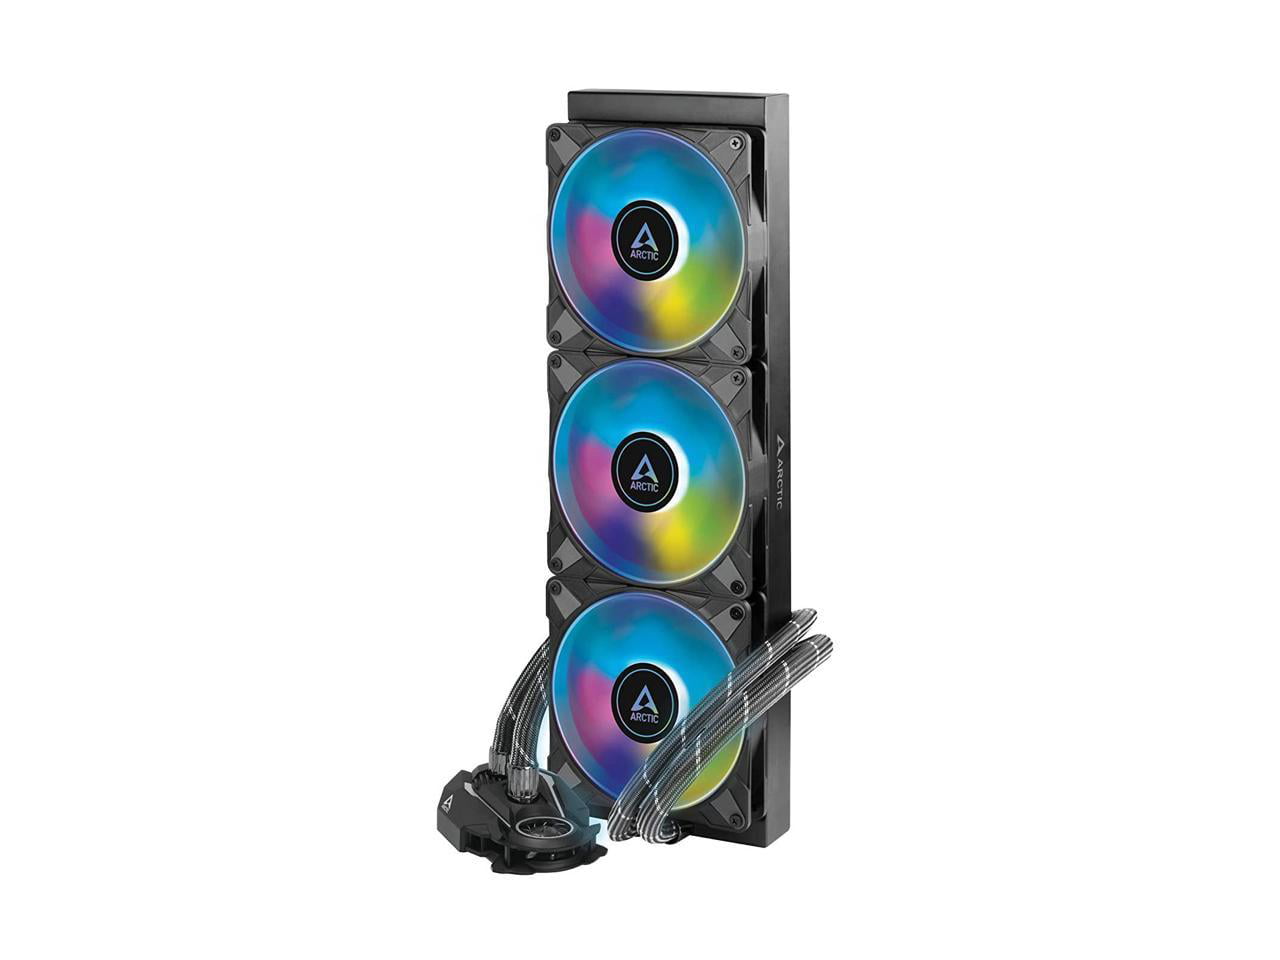 Dear friends i need your assistance i got a Corsair 4000D and really wanted  liguid cooling so i bought a Arctic Liquid Freezer II 360 x3 120mm just to  find out its